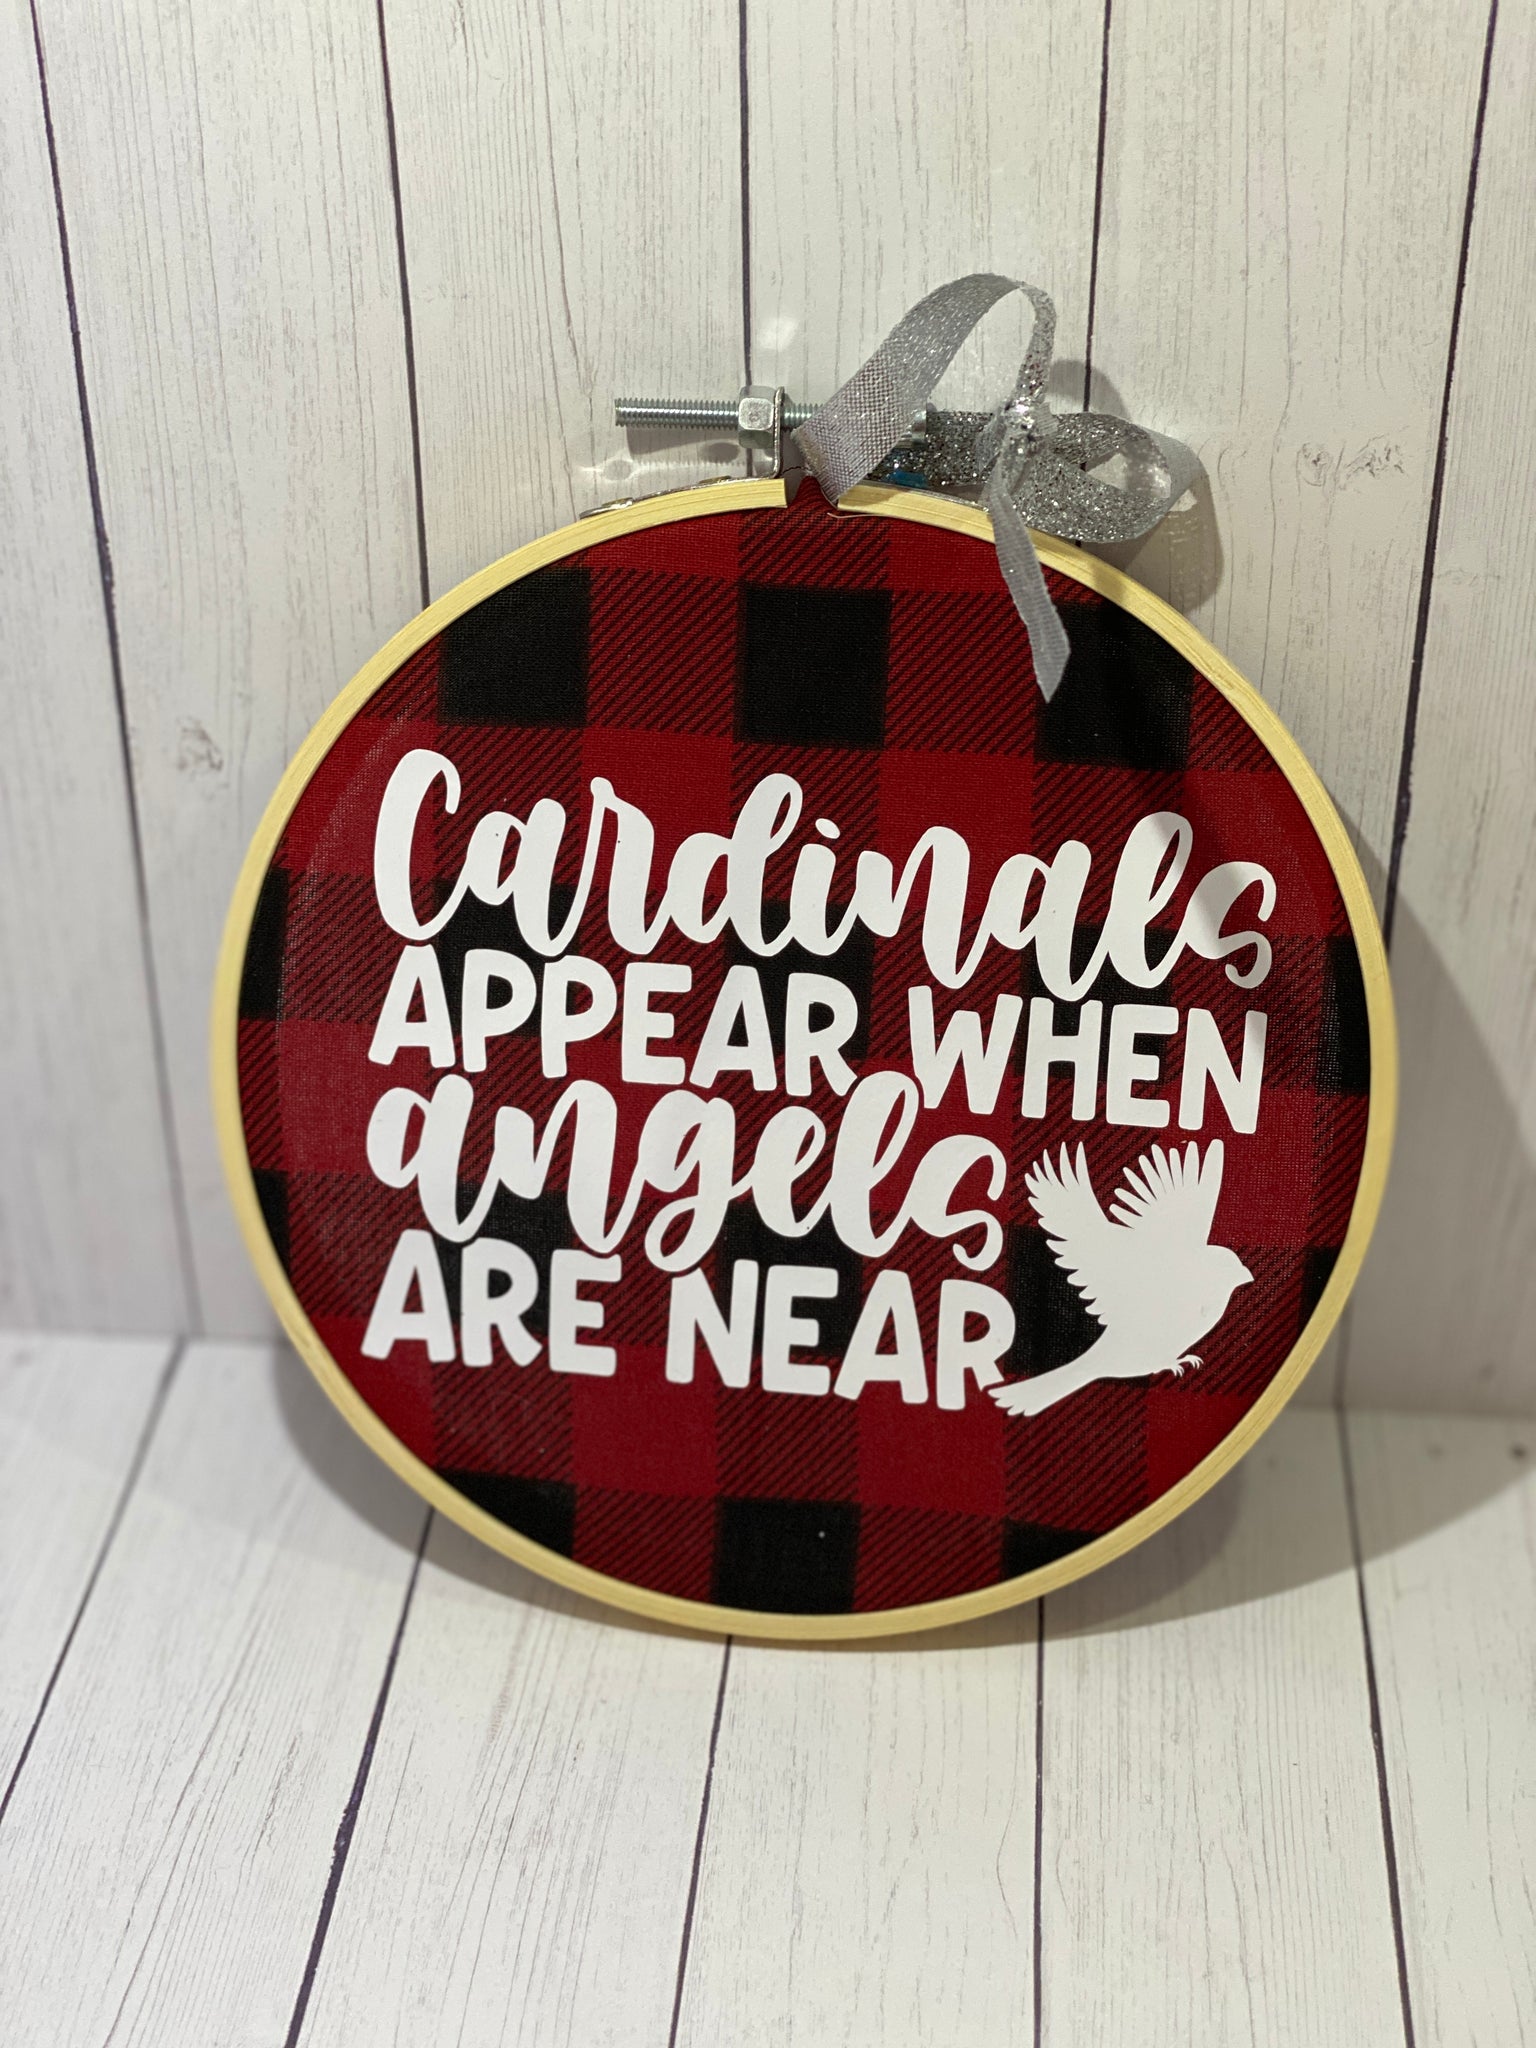 Cardinals Appear When Angels Are Near Embroidered Ornament